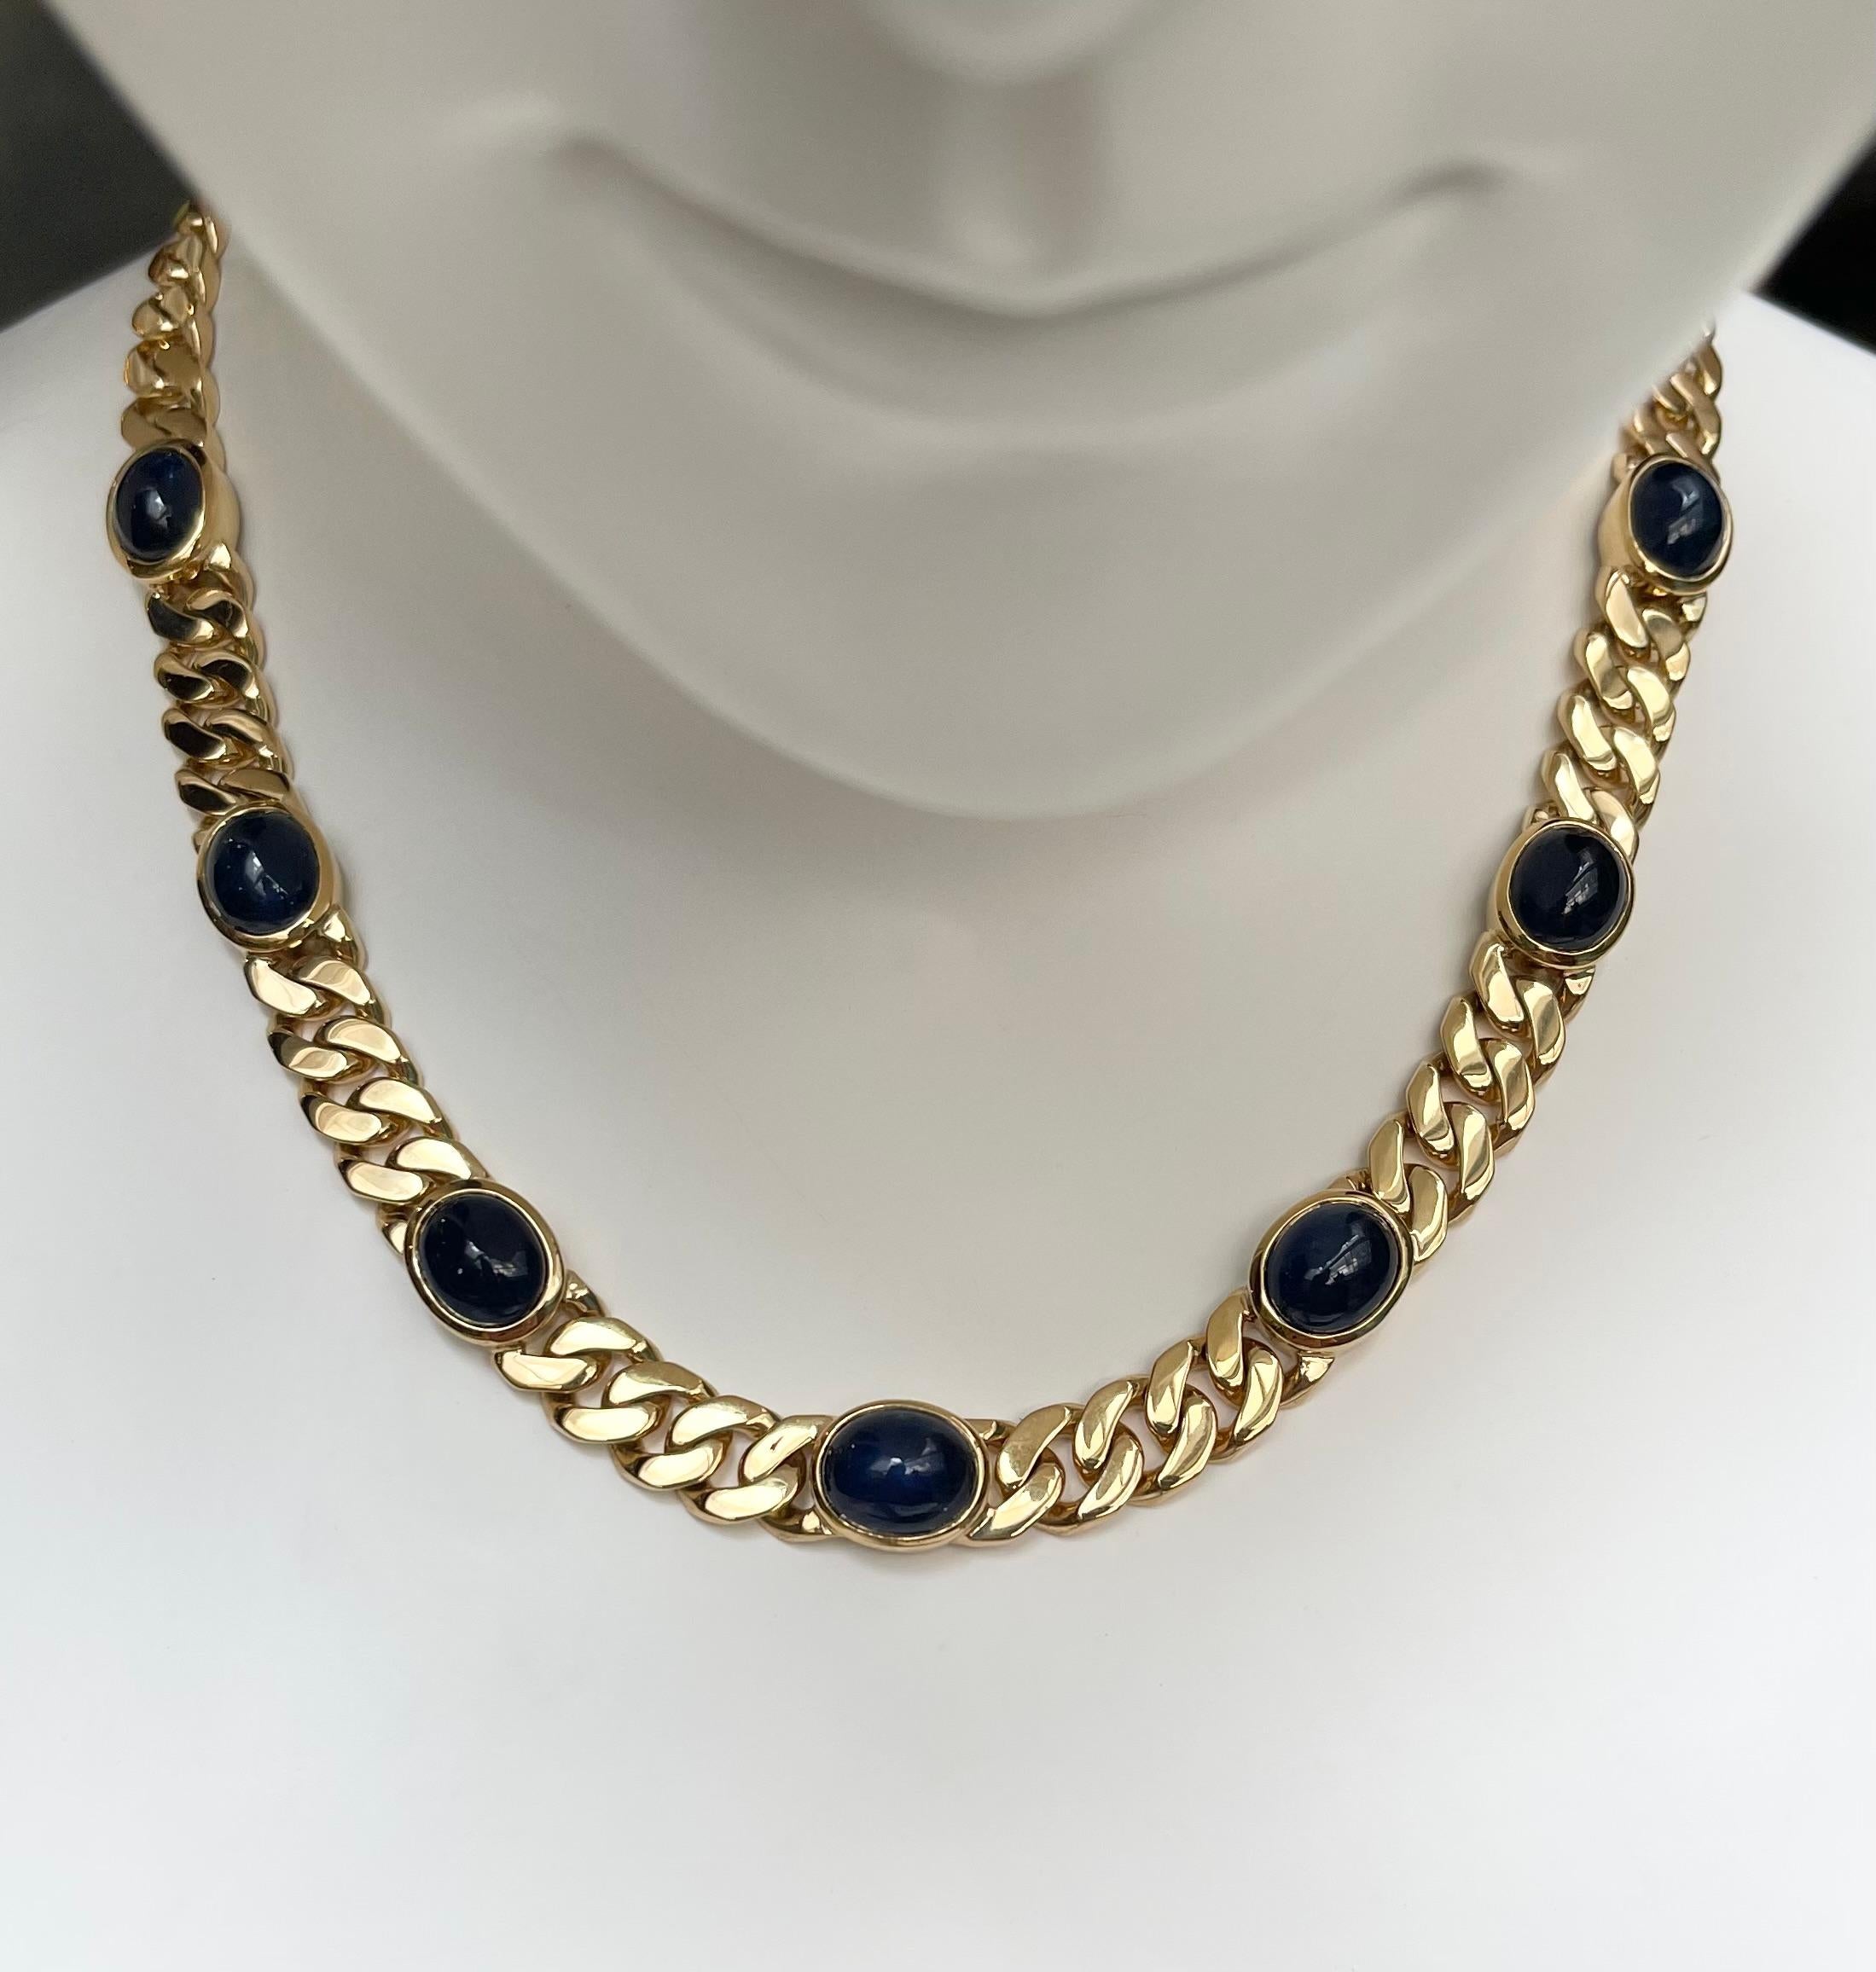 Cabochon Blue Sapphire 33.57 carats Necklace set in 18K Gold Settings

Width: 1.1 cm 
Length: 43 cm
Total Weight: 95.29 grams

